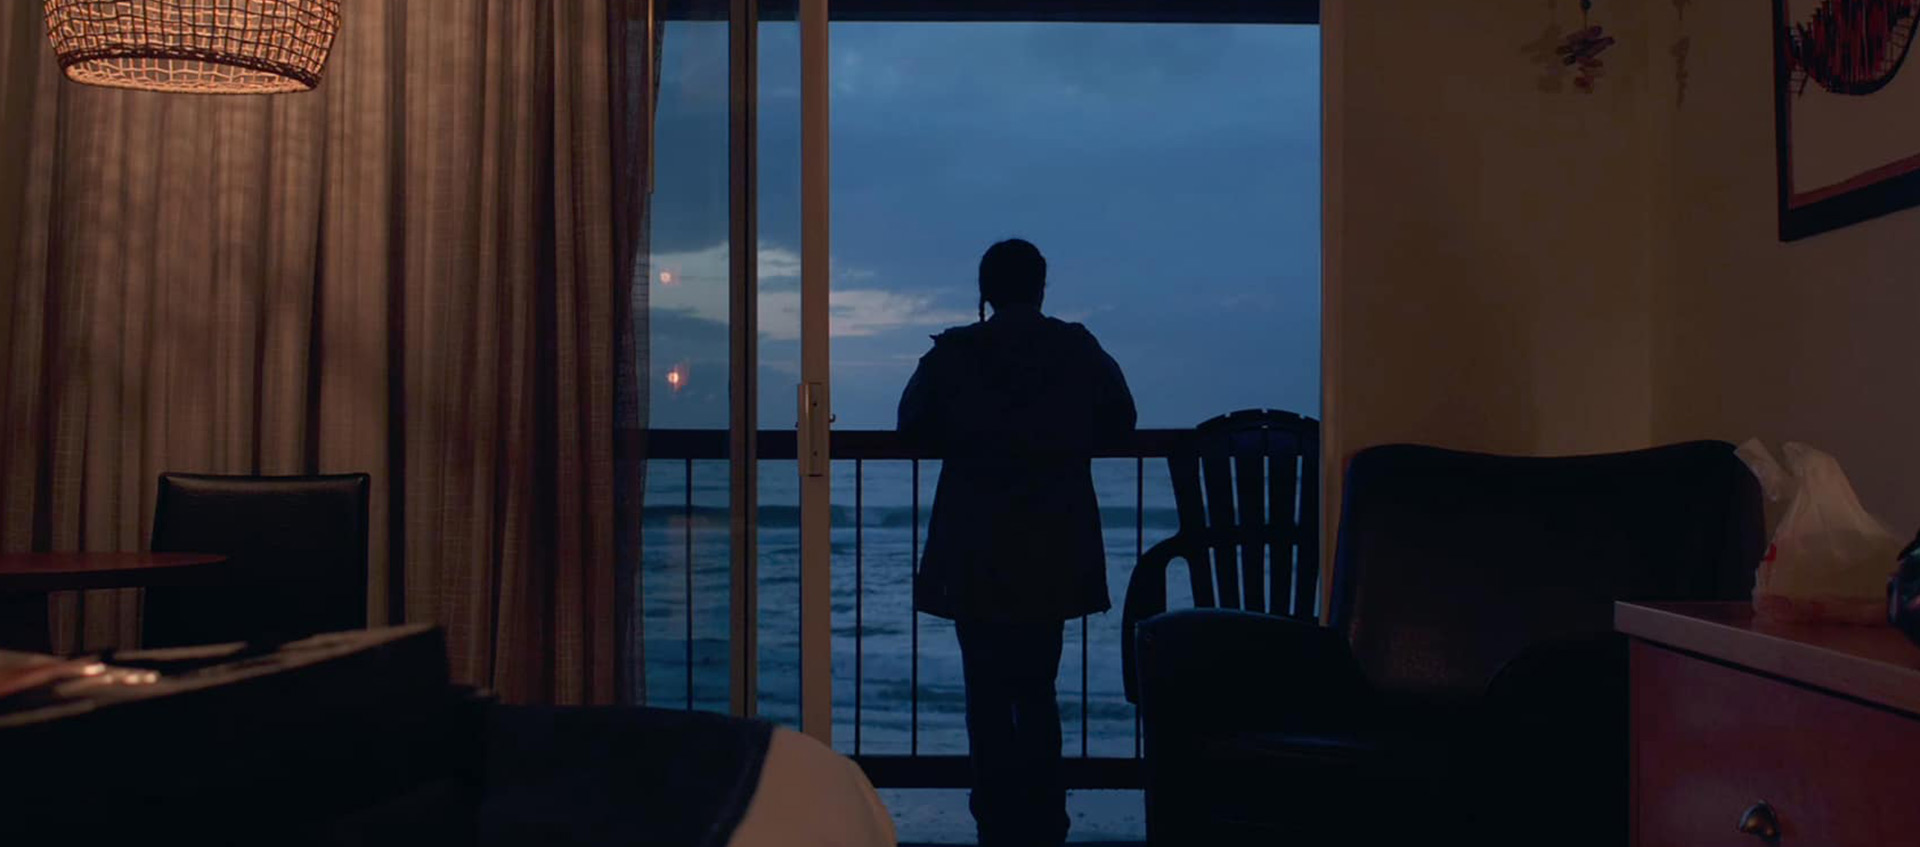 A person, seen from behind and in silhouette, looks out over the ocean on the balcony of a small room